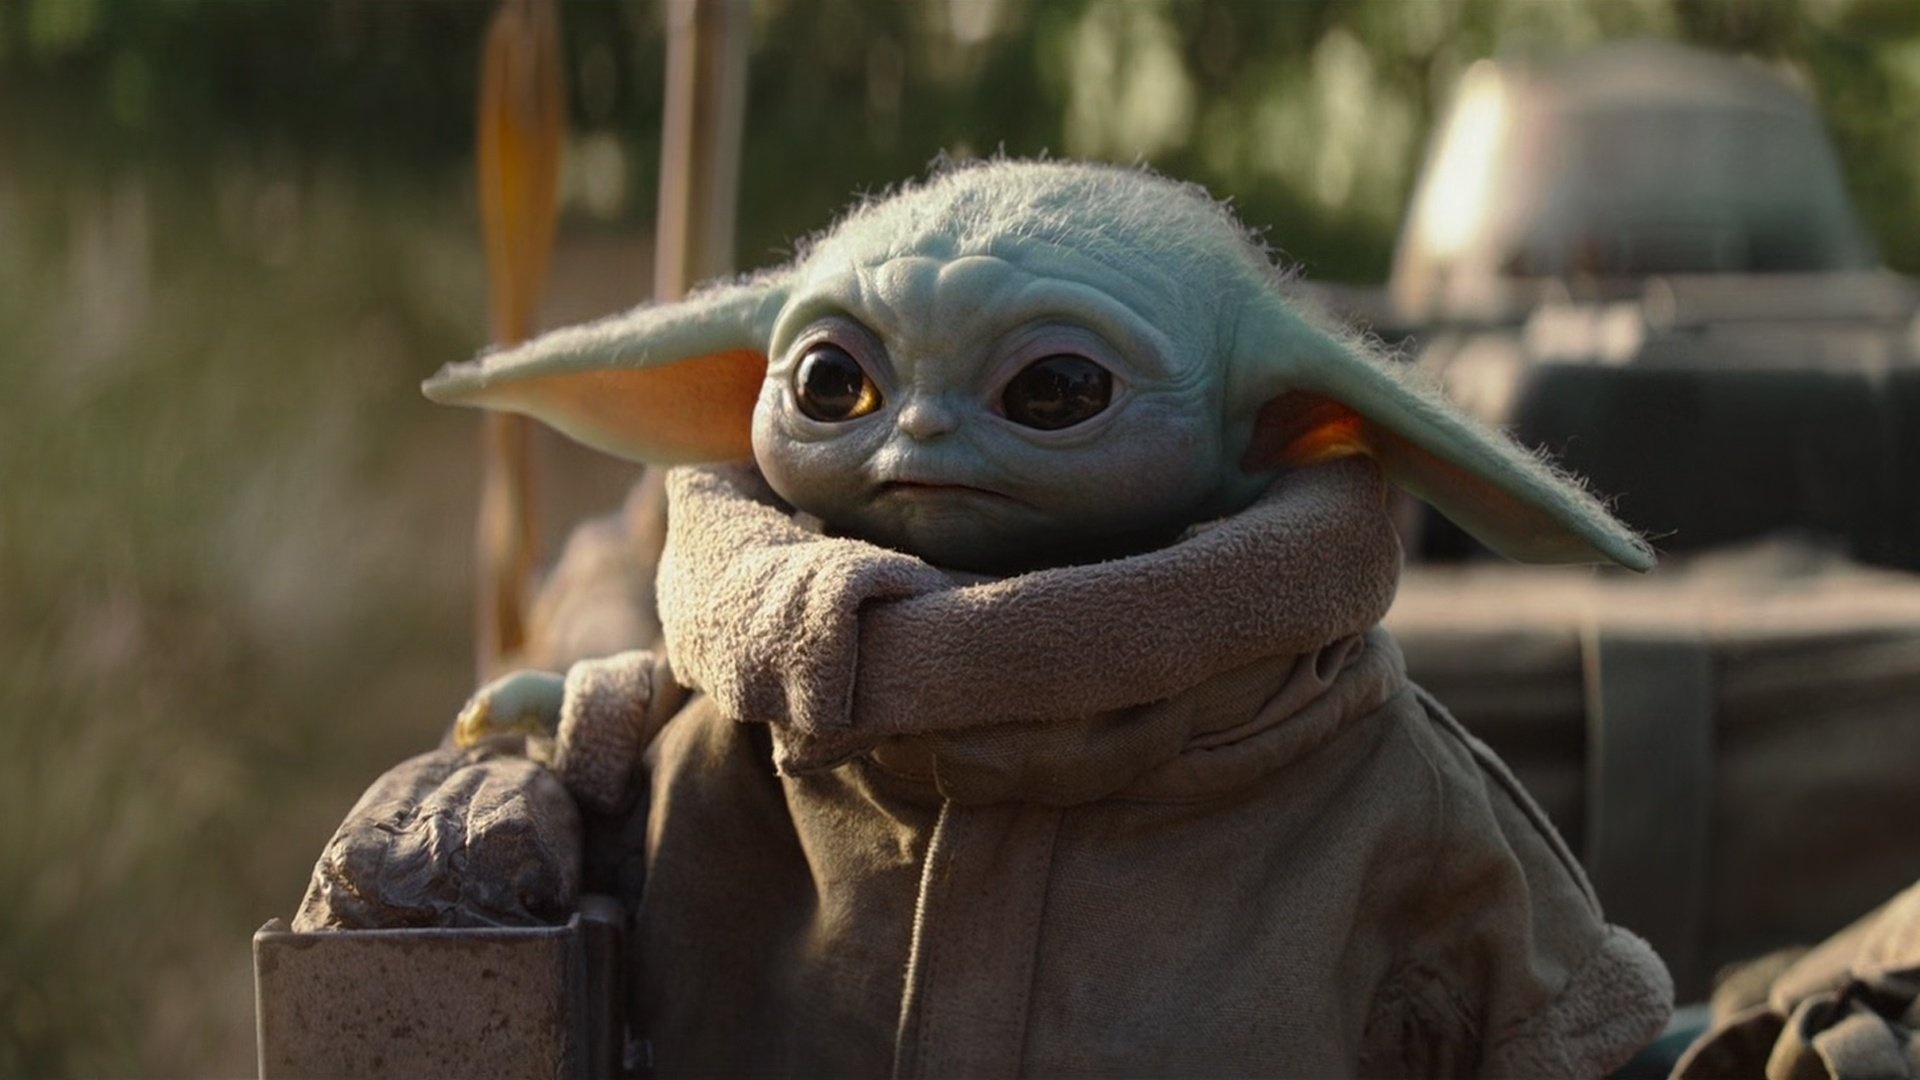 Baby Yoda, HD wallpapers, Background images, Cute, 1920x1080 Full HD Desktop